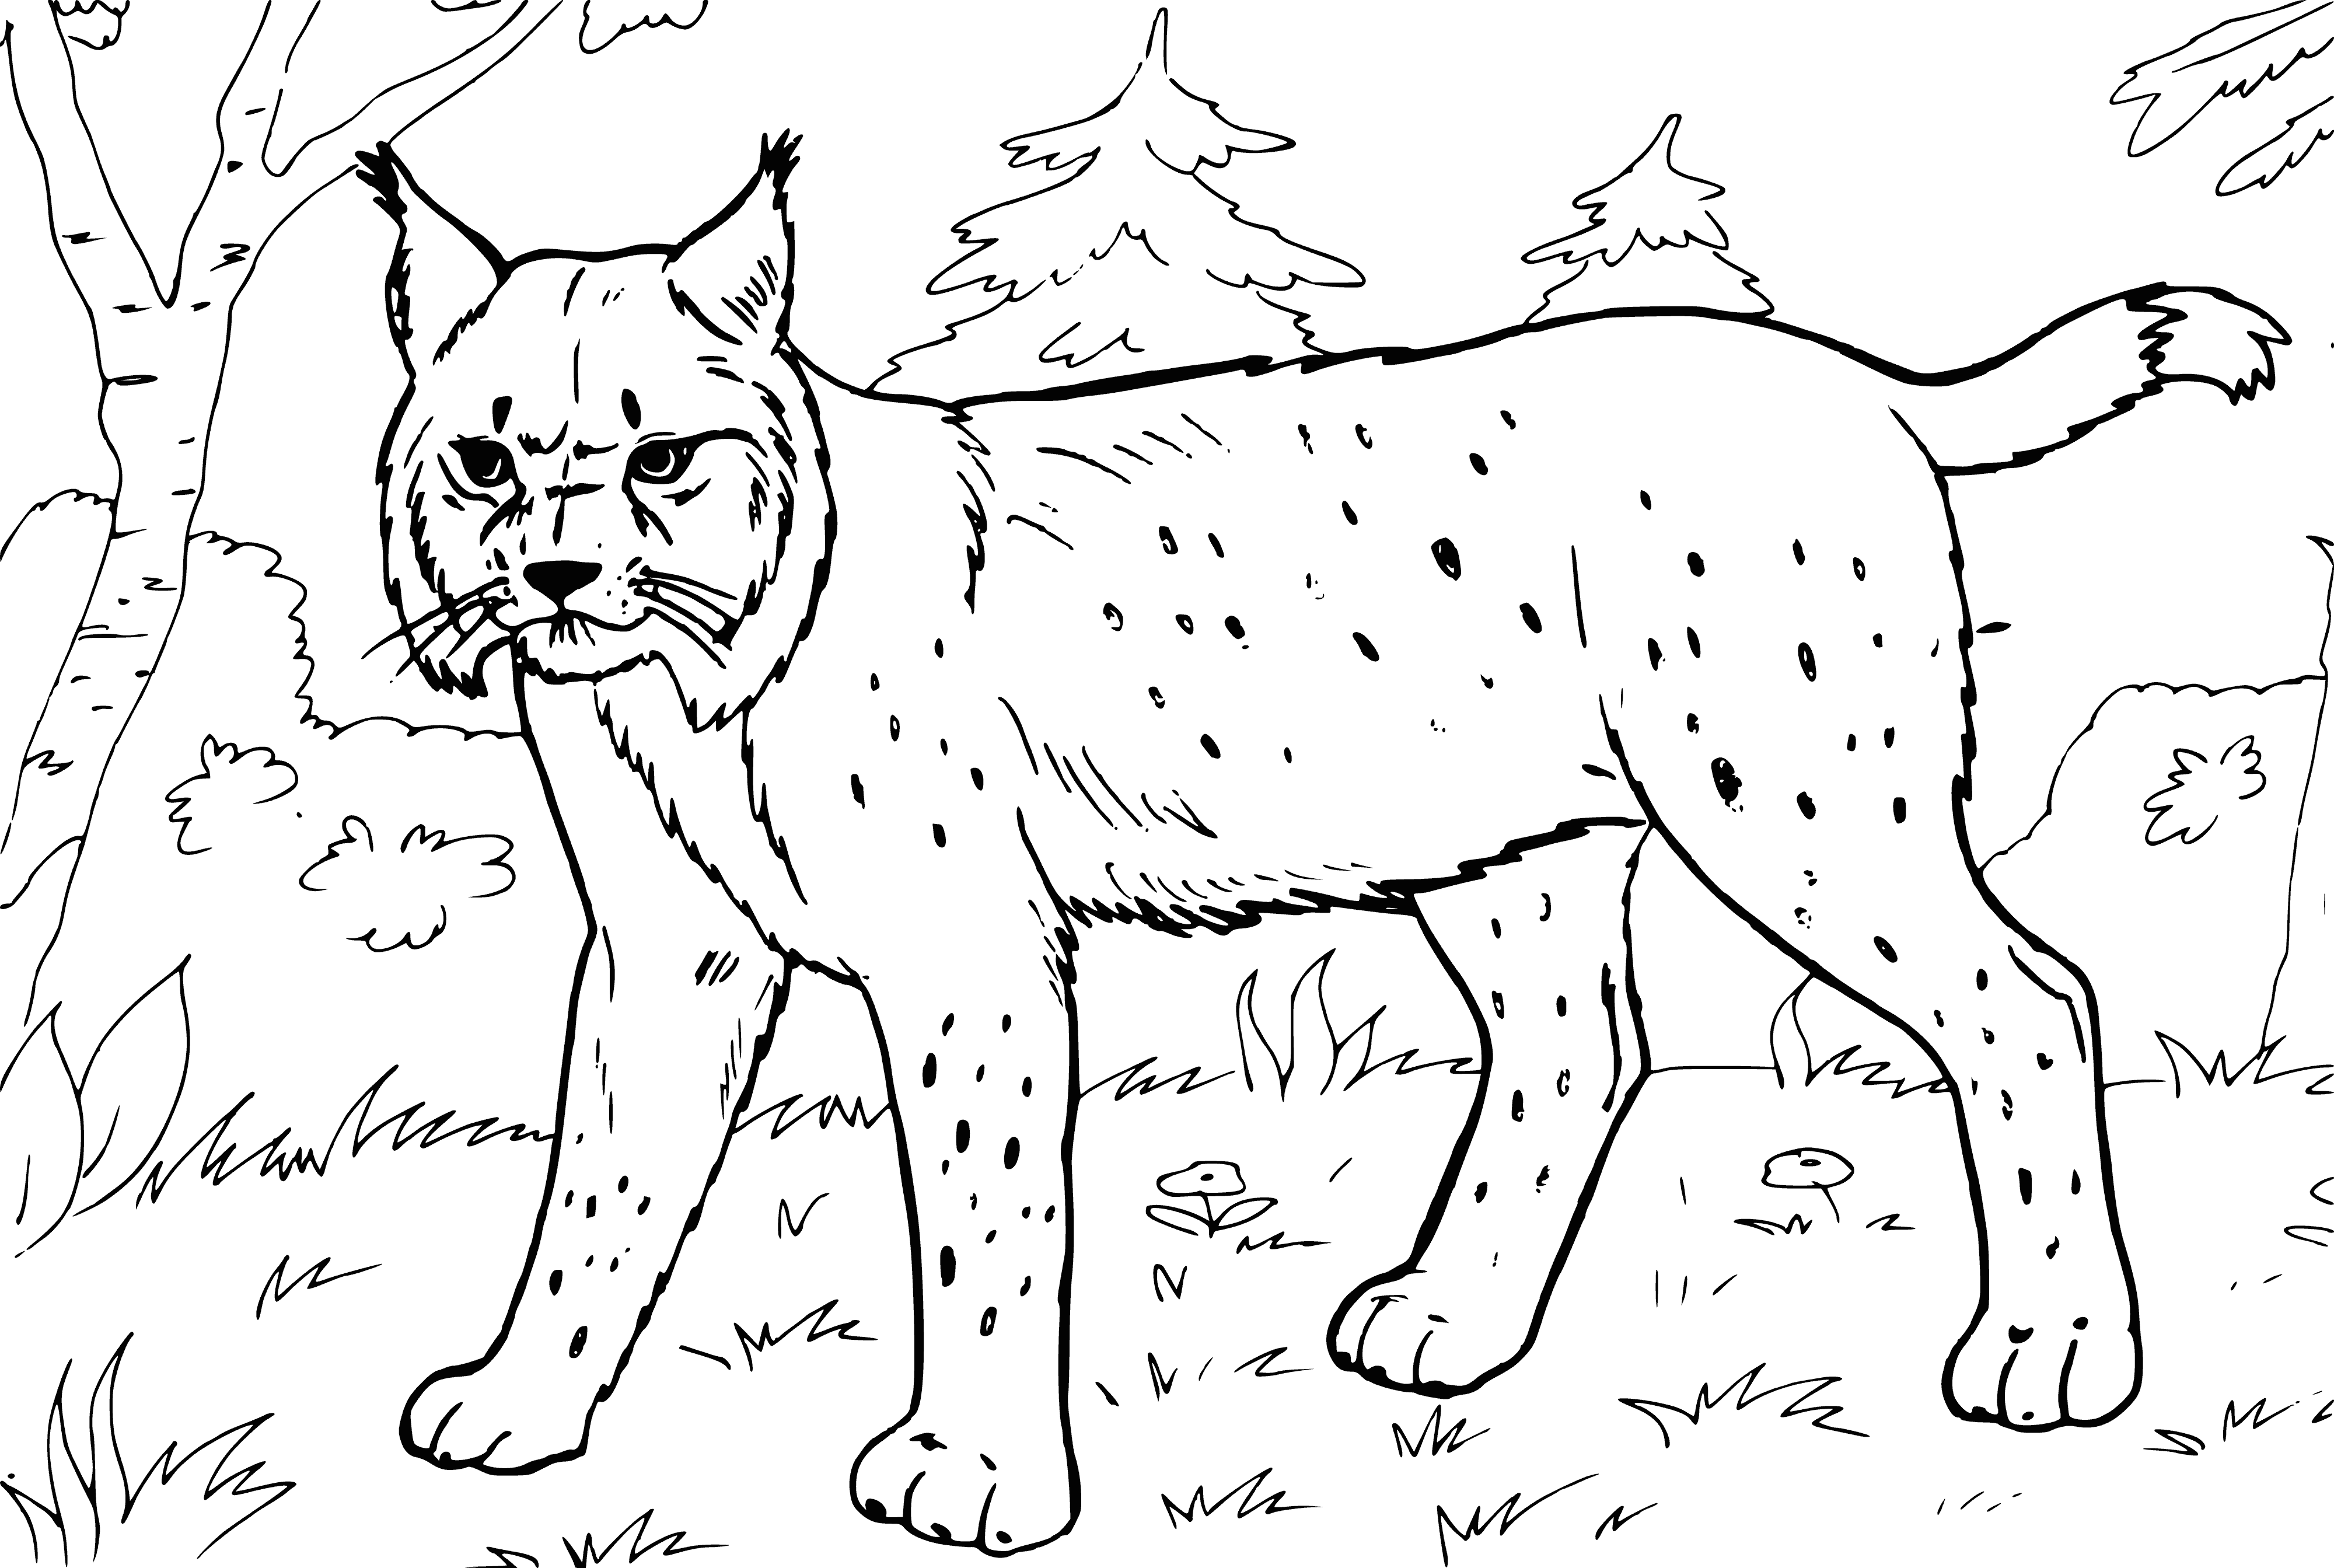 coloring page: Coloring page of a lynx with white fur, brown spots, pointy ears, tufted cheeks and sharp claws. #Wildlife #Coloring #Lynx